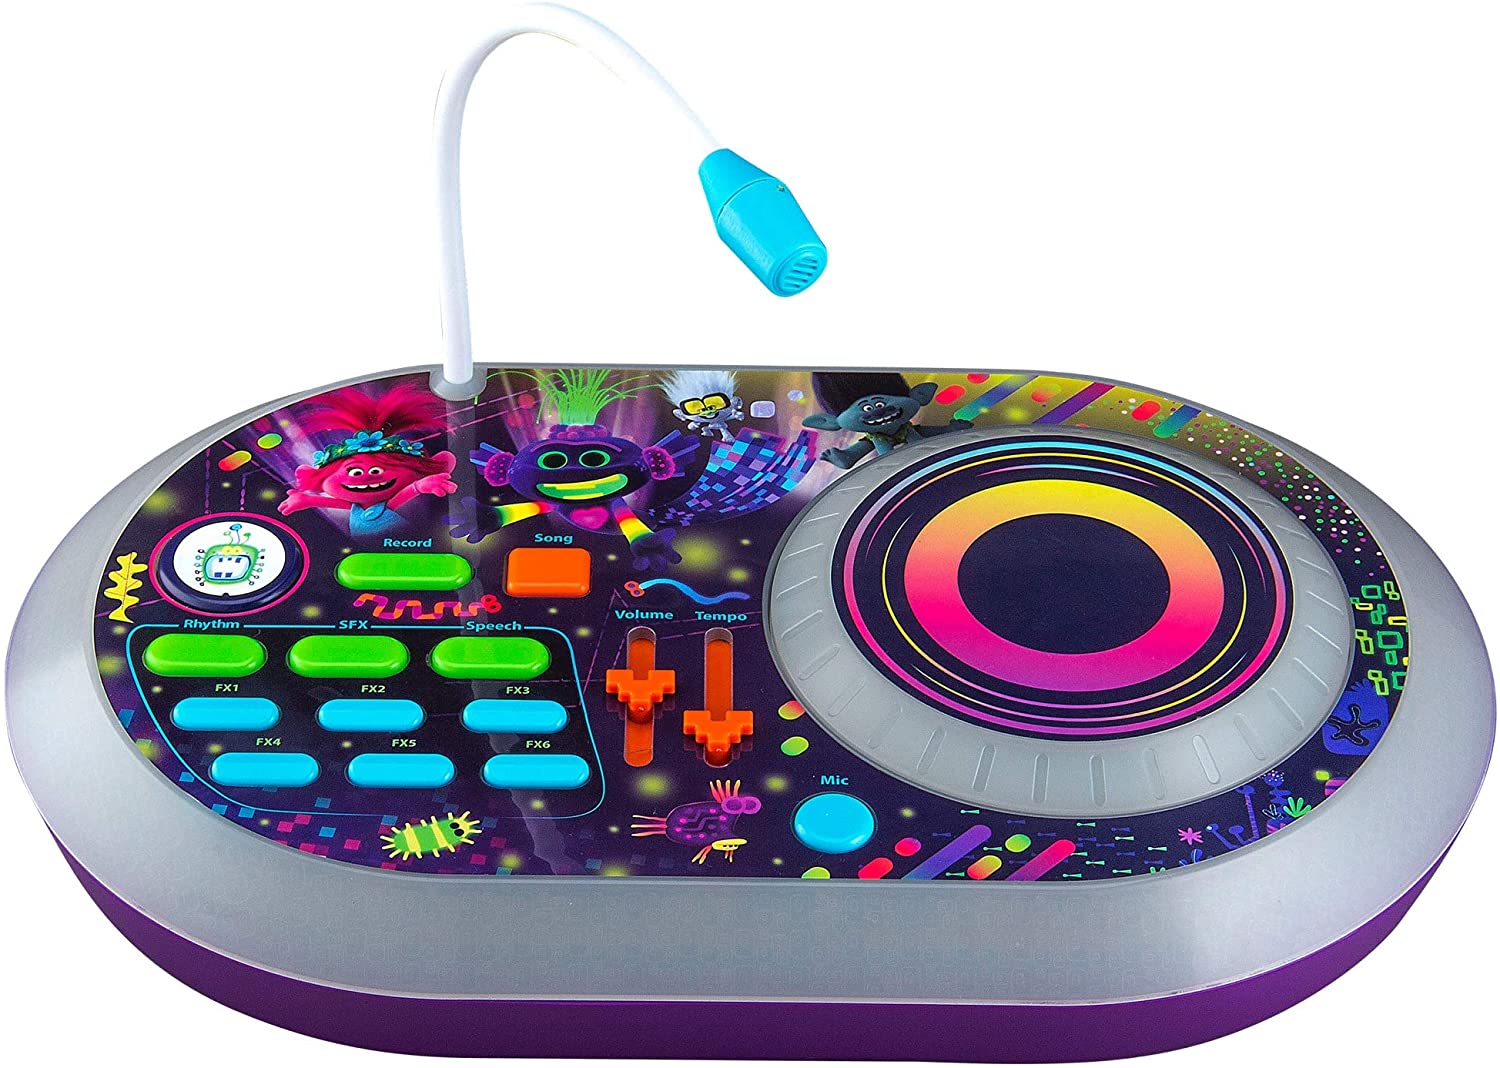 eKids Trolls World Tour DJ Trollex Party Mixer Turntable Toy $20.74 + Free Shipping w/ Prime or on orders over $25